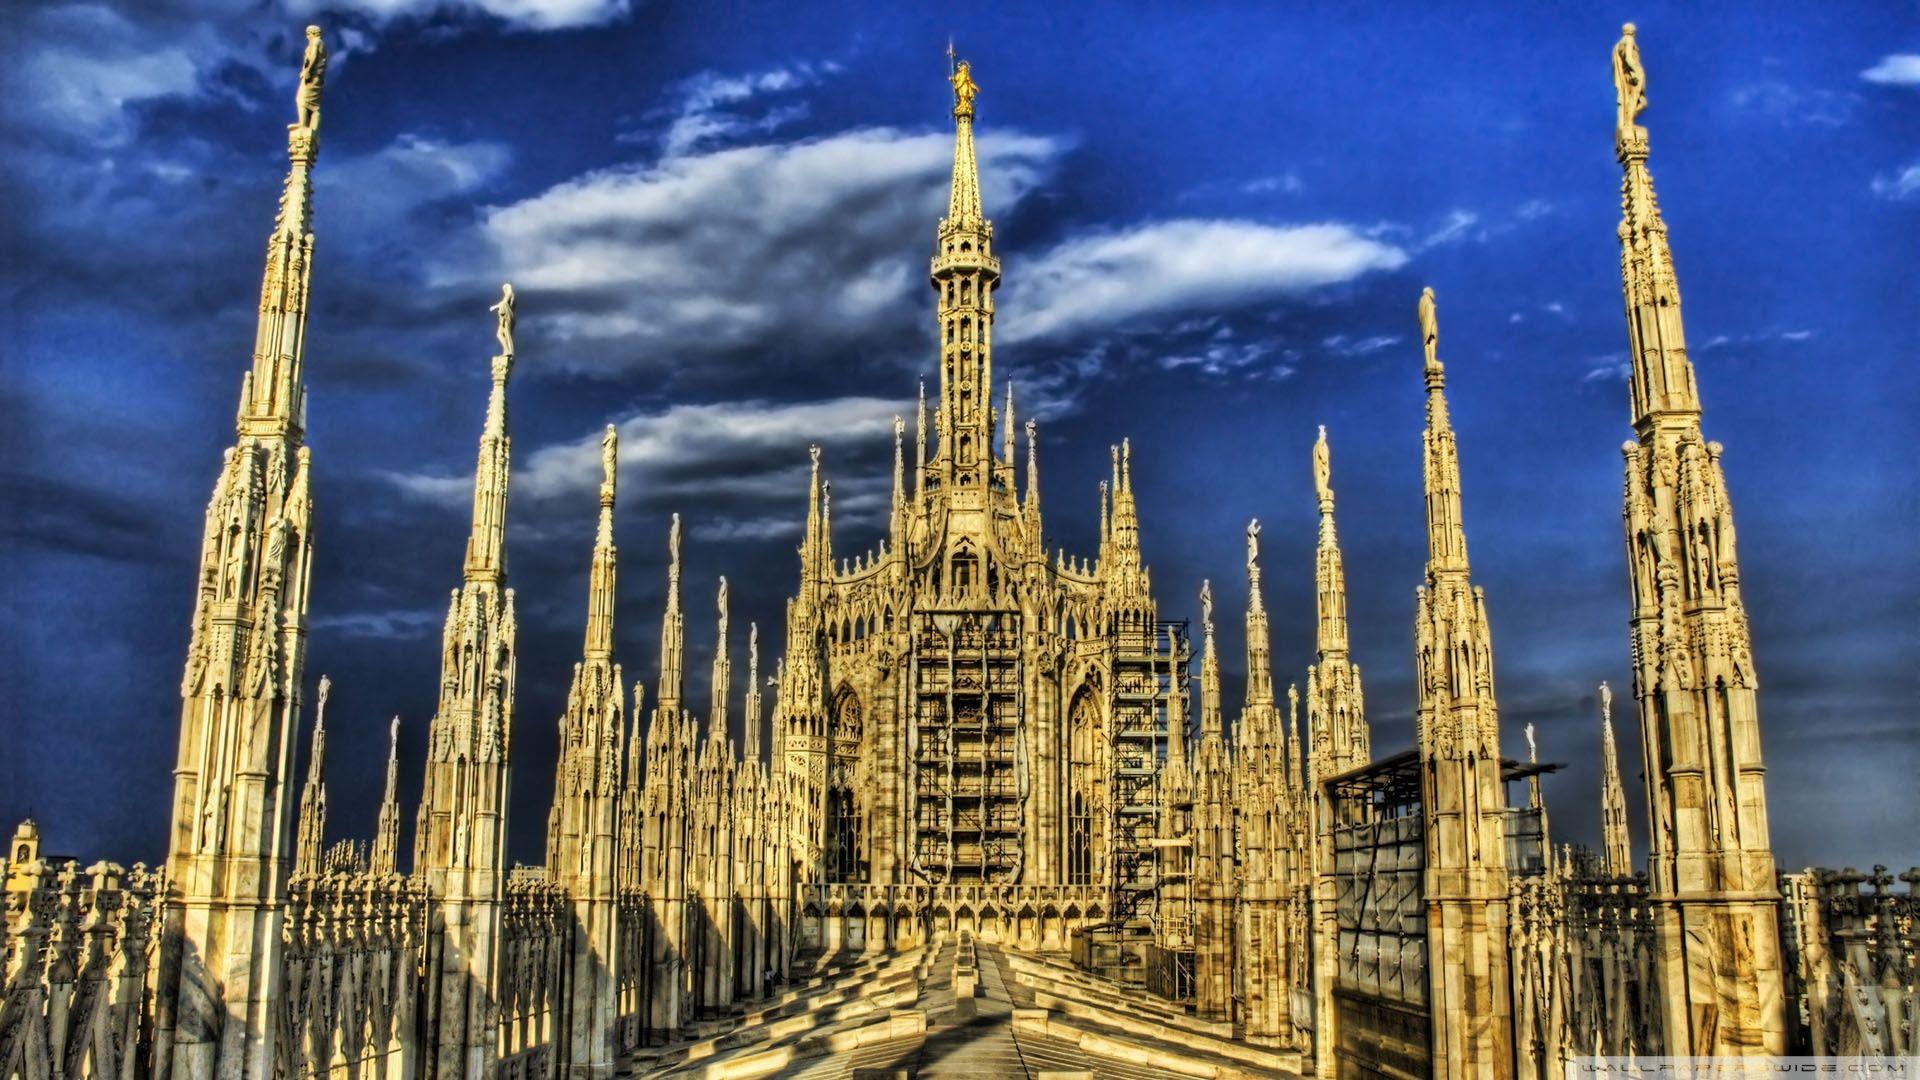 Gothic Architecture Picture Of Cities Picture For Desktop